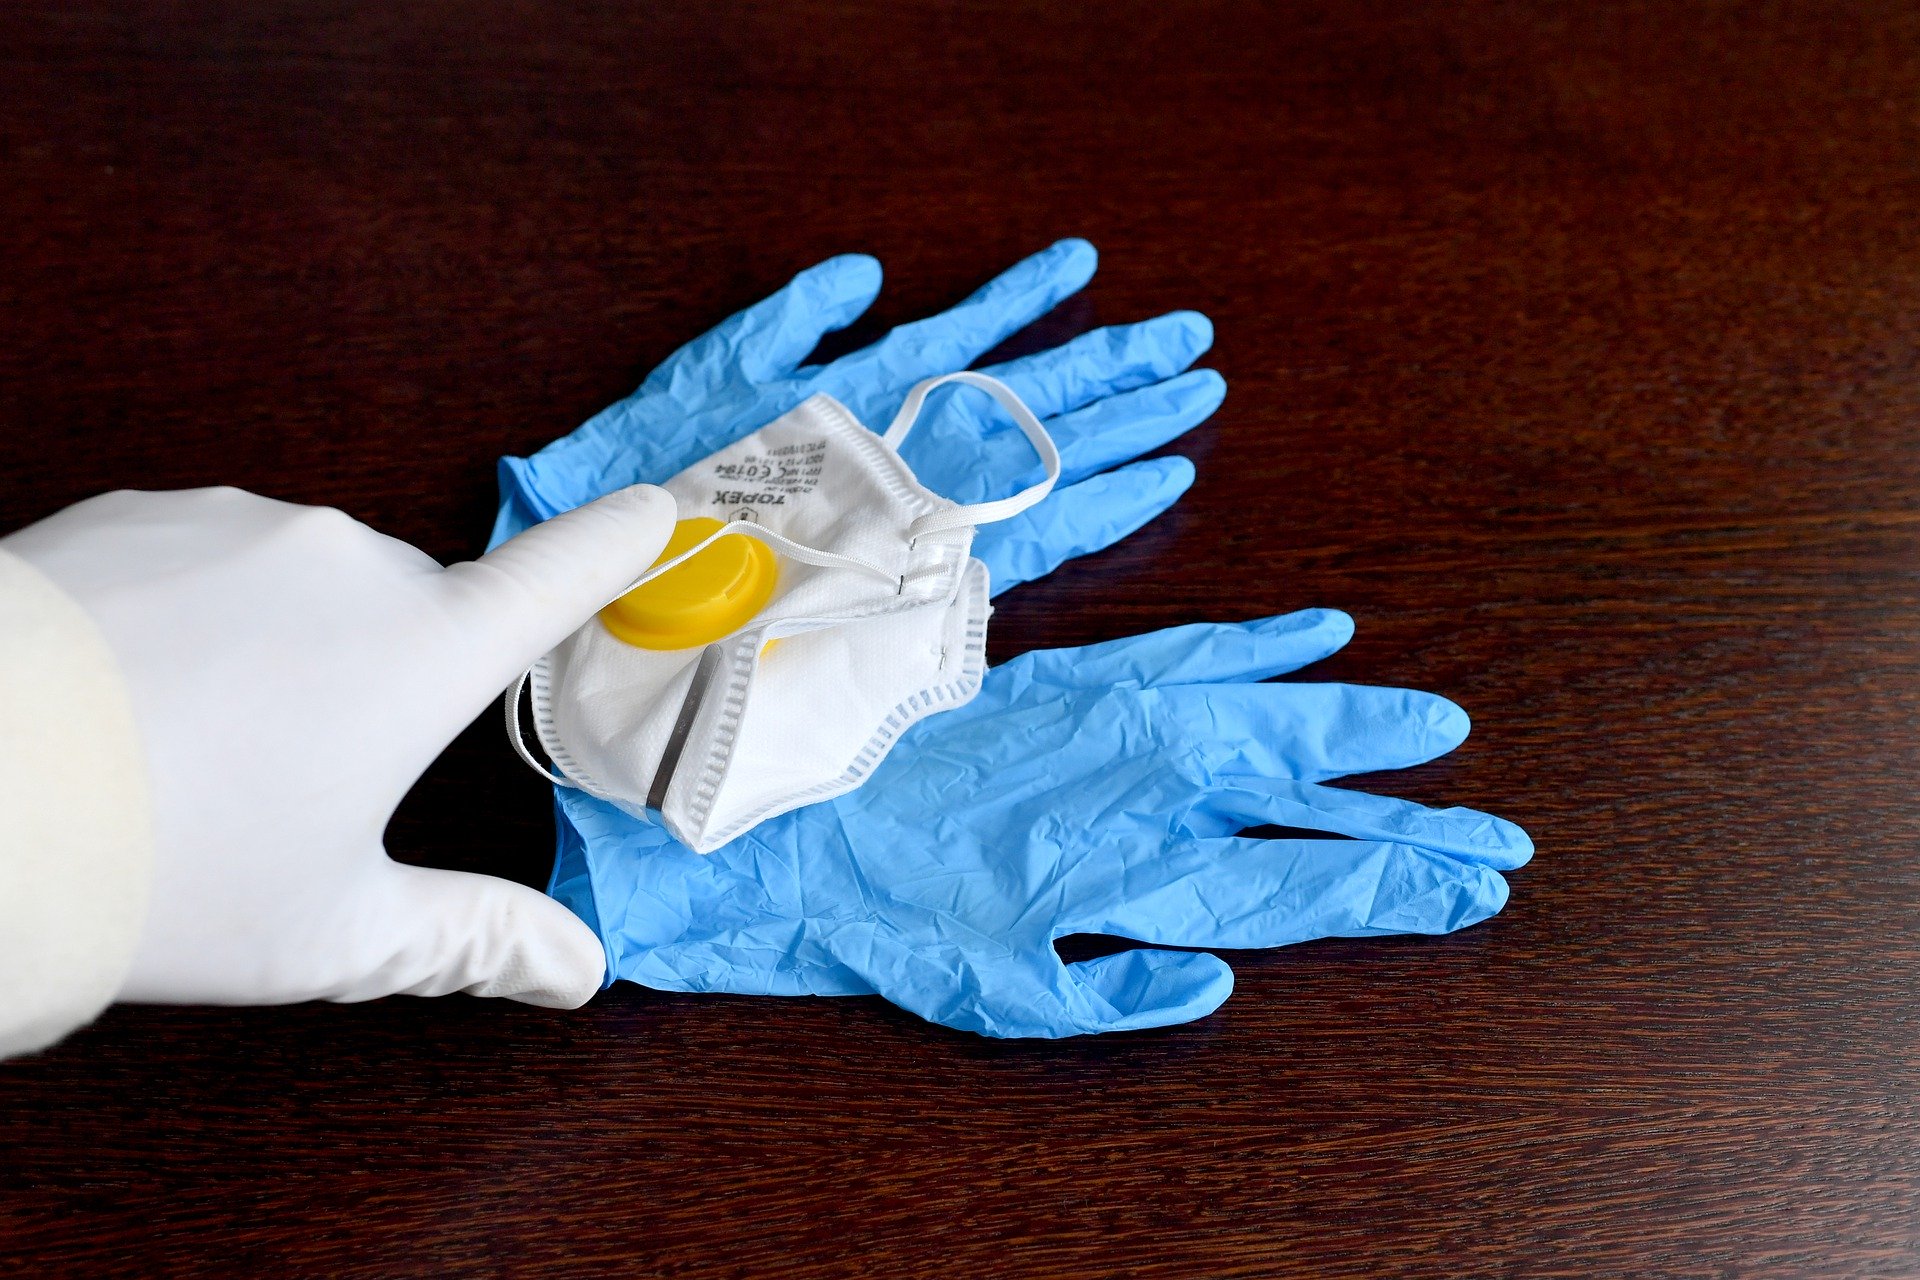 Use gloves & Mask for protection